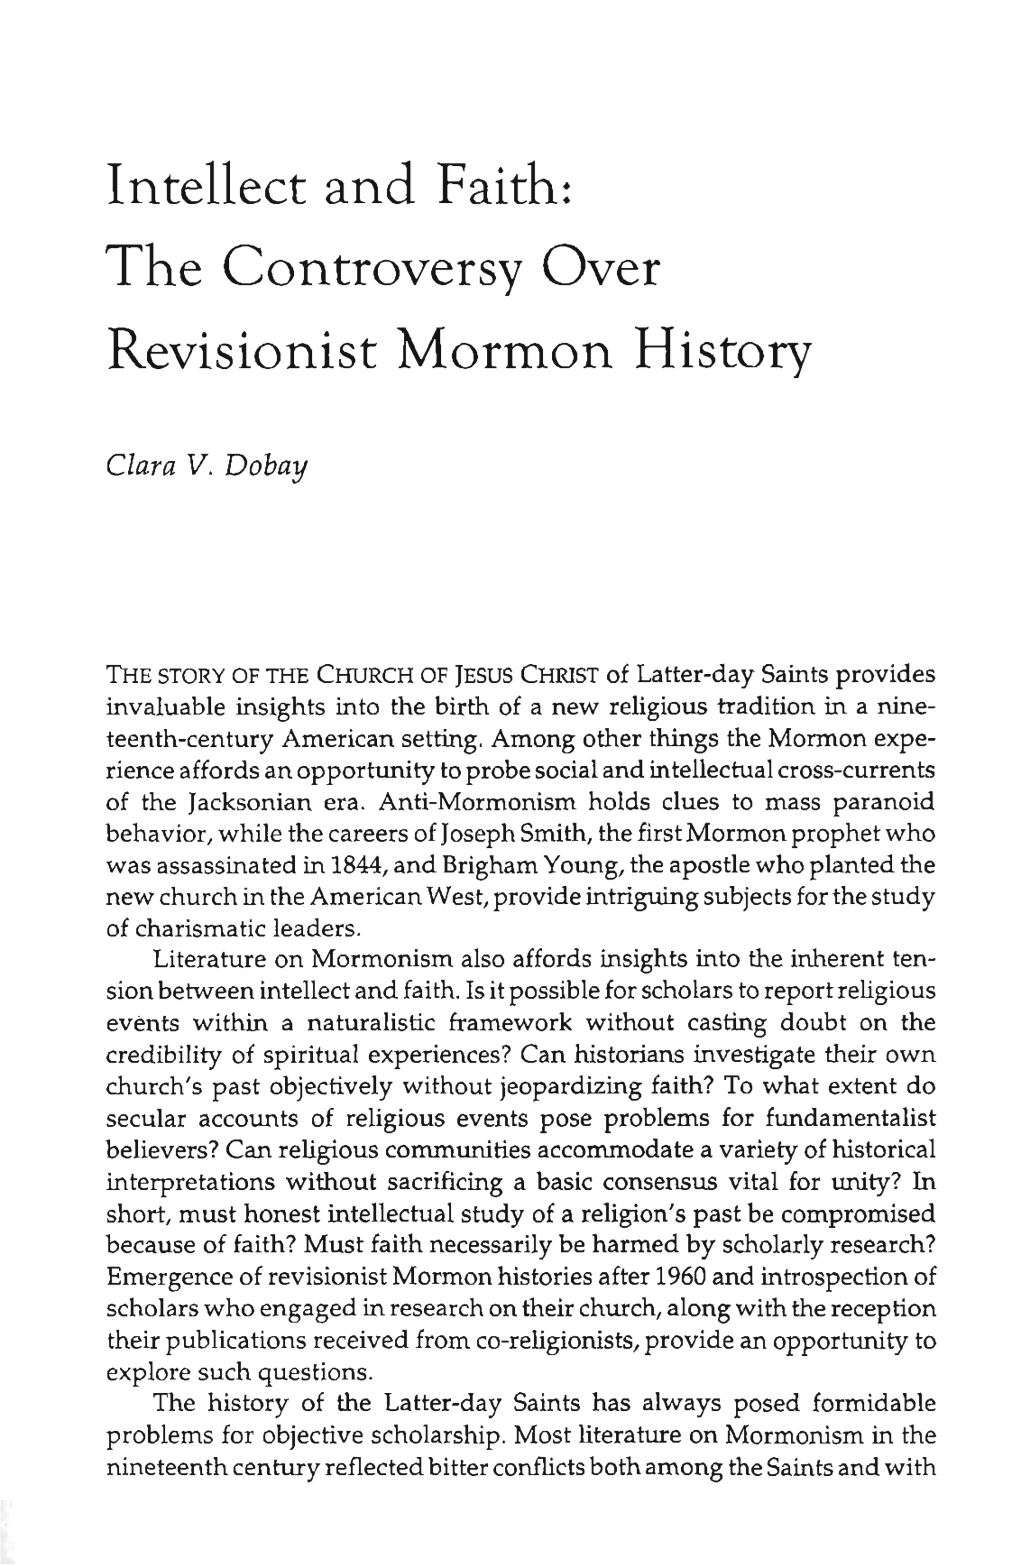 Intellect and Faith: the Controversy Over Revisionist Mormon History